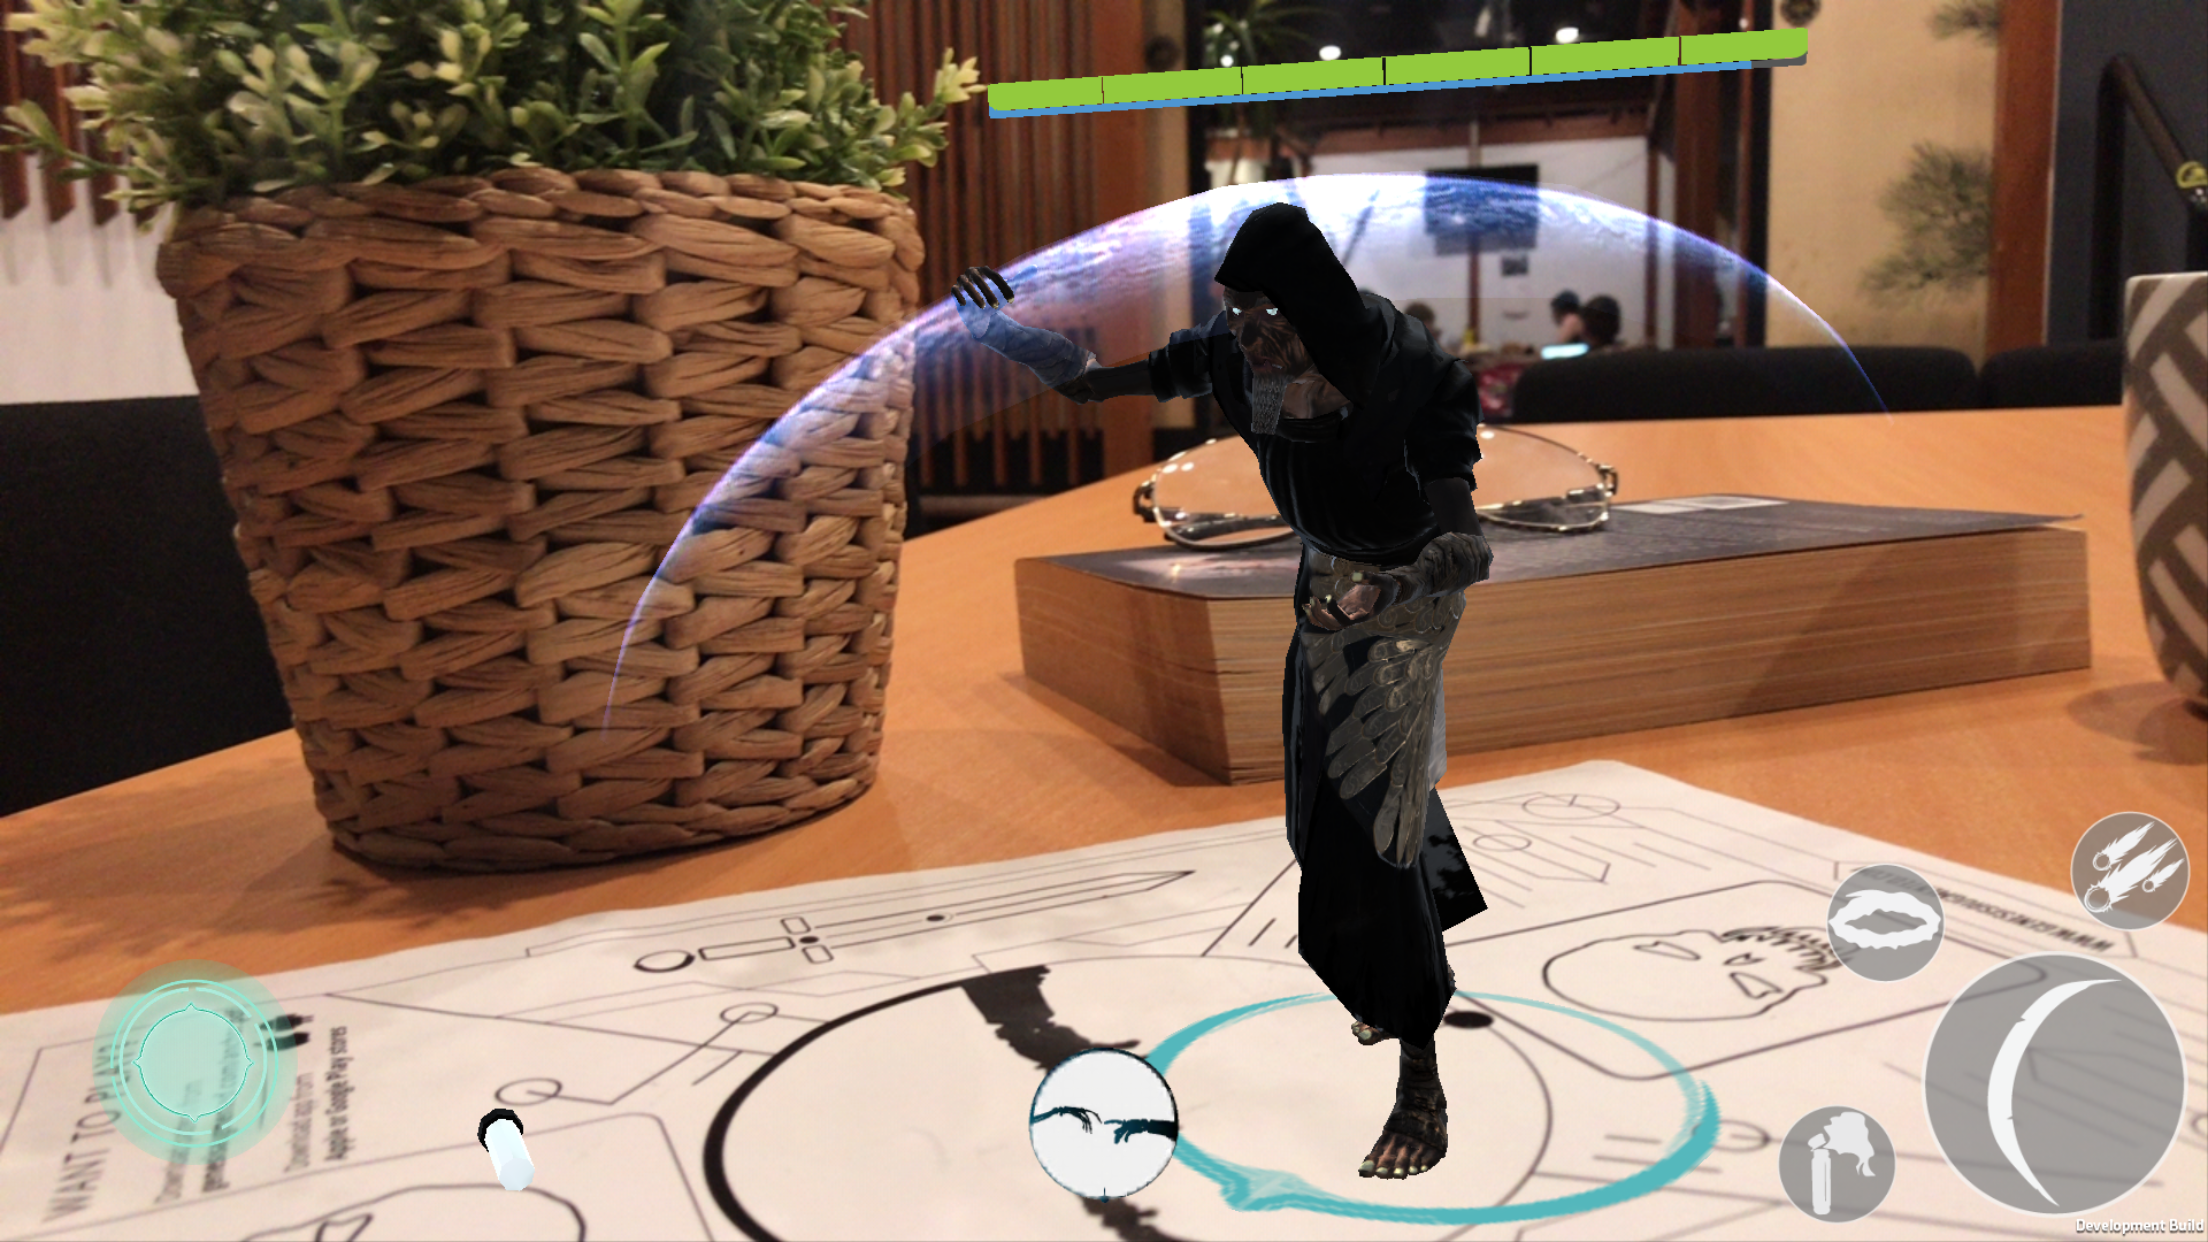 Genesis Augmented Reality playable character called Erebus in Augmented Reality on a table